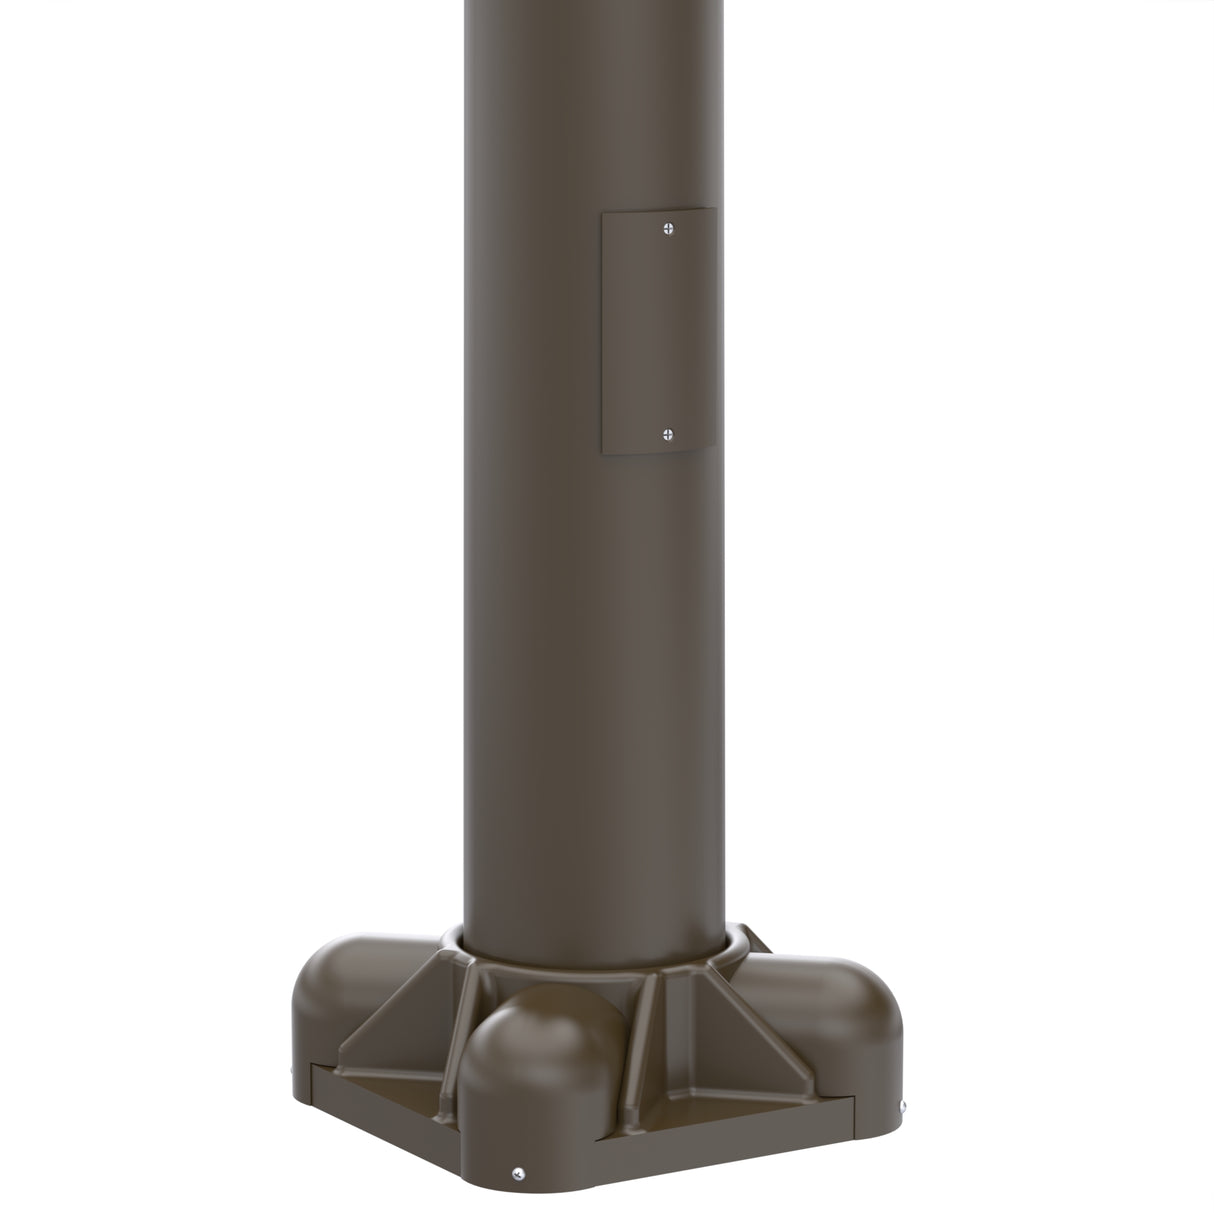 30' Tall x 8.0" Base OD x 4.5" Top OD x 0.250" Thick, Round Tapered Aluminum, Anchor Base Light Pole